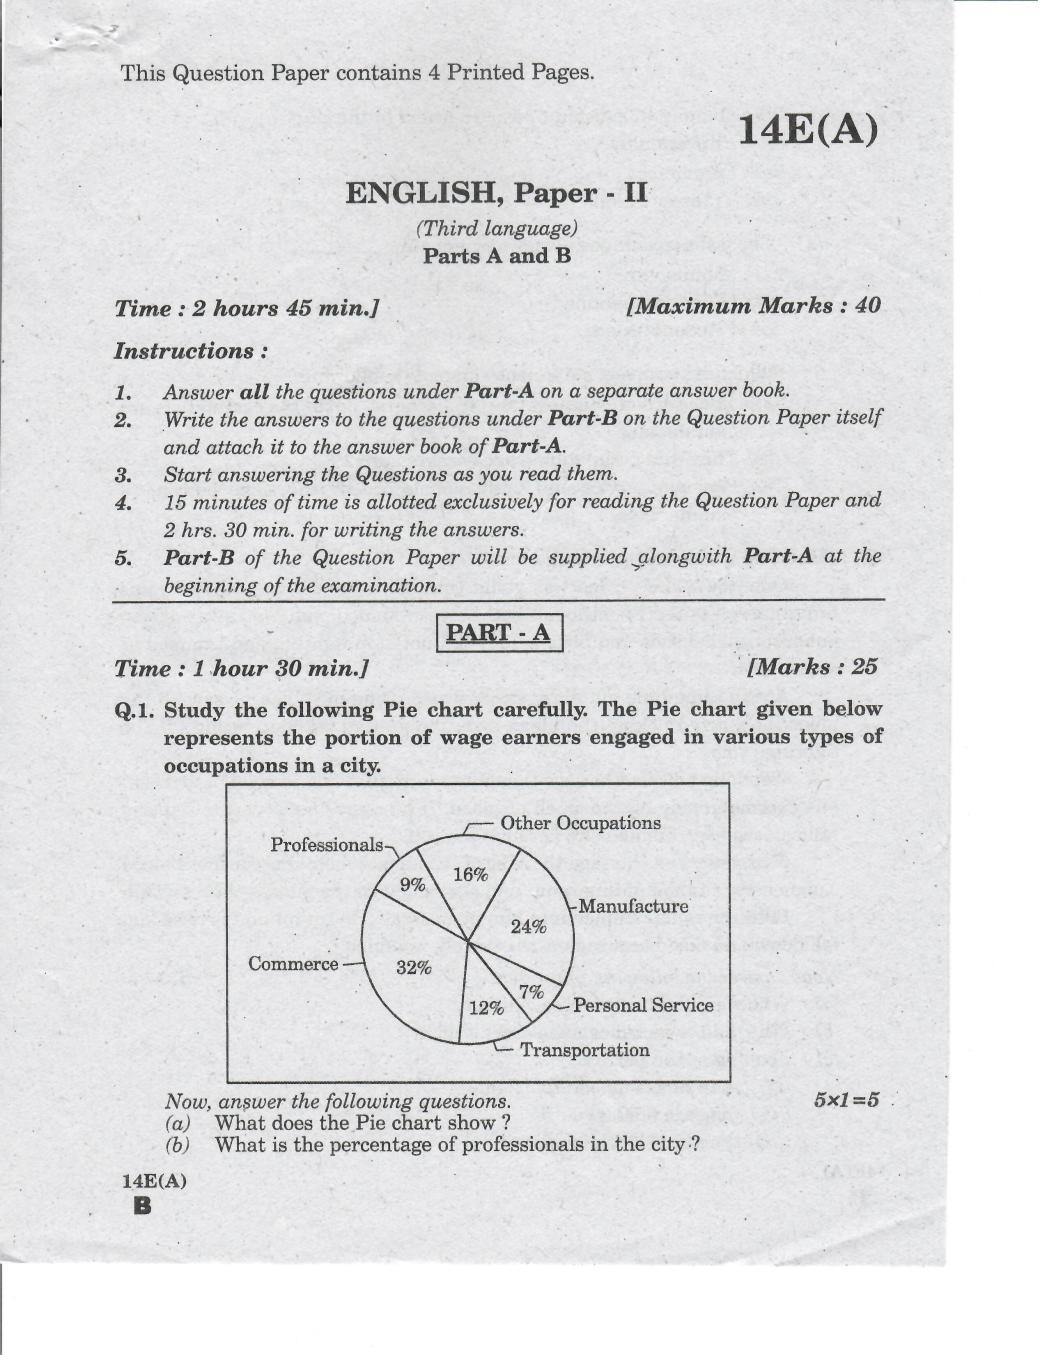 AP 10th Class Question Paper 2019 English - Paper 2 (3rd Language) - Page 1